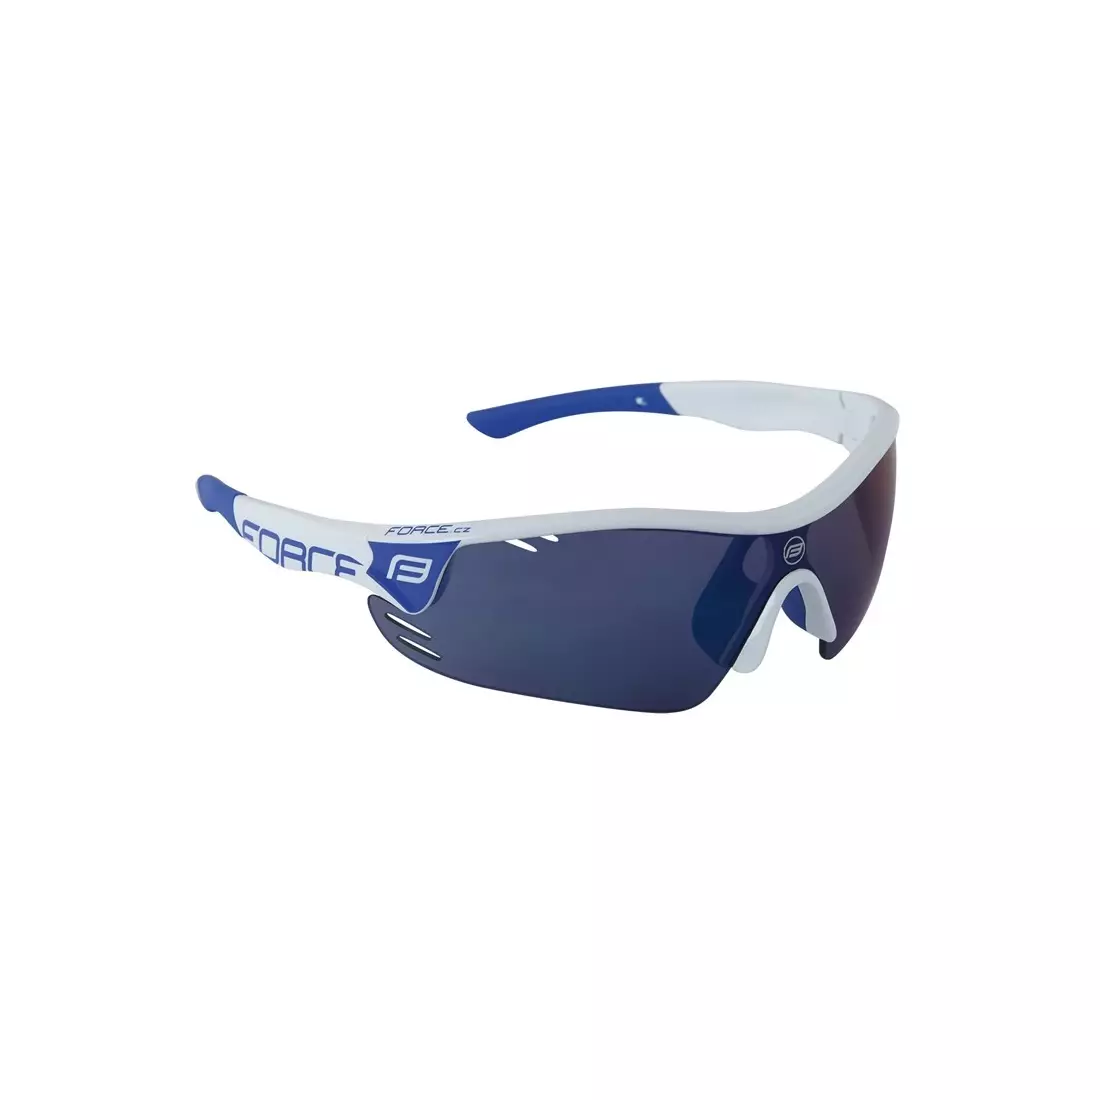 FORCE RACE PRO Blue and white glasses 909391